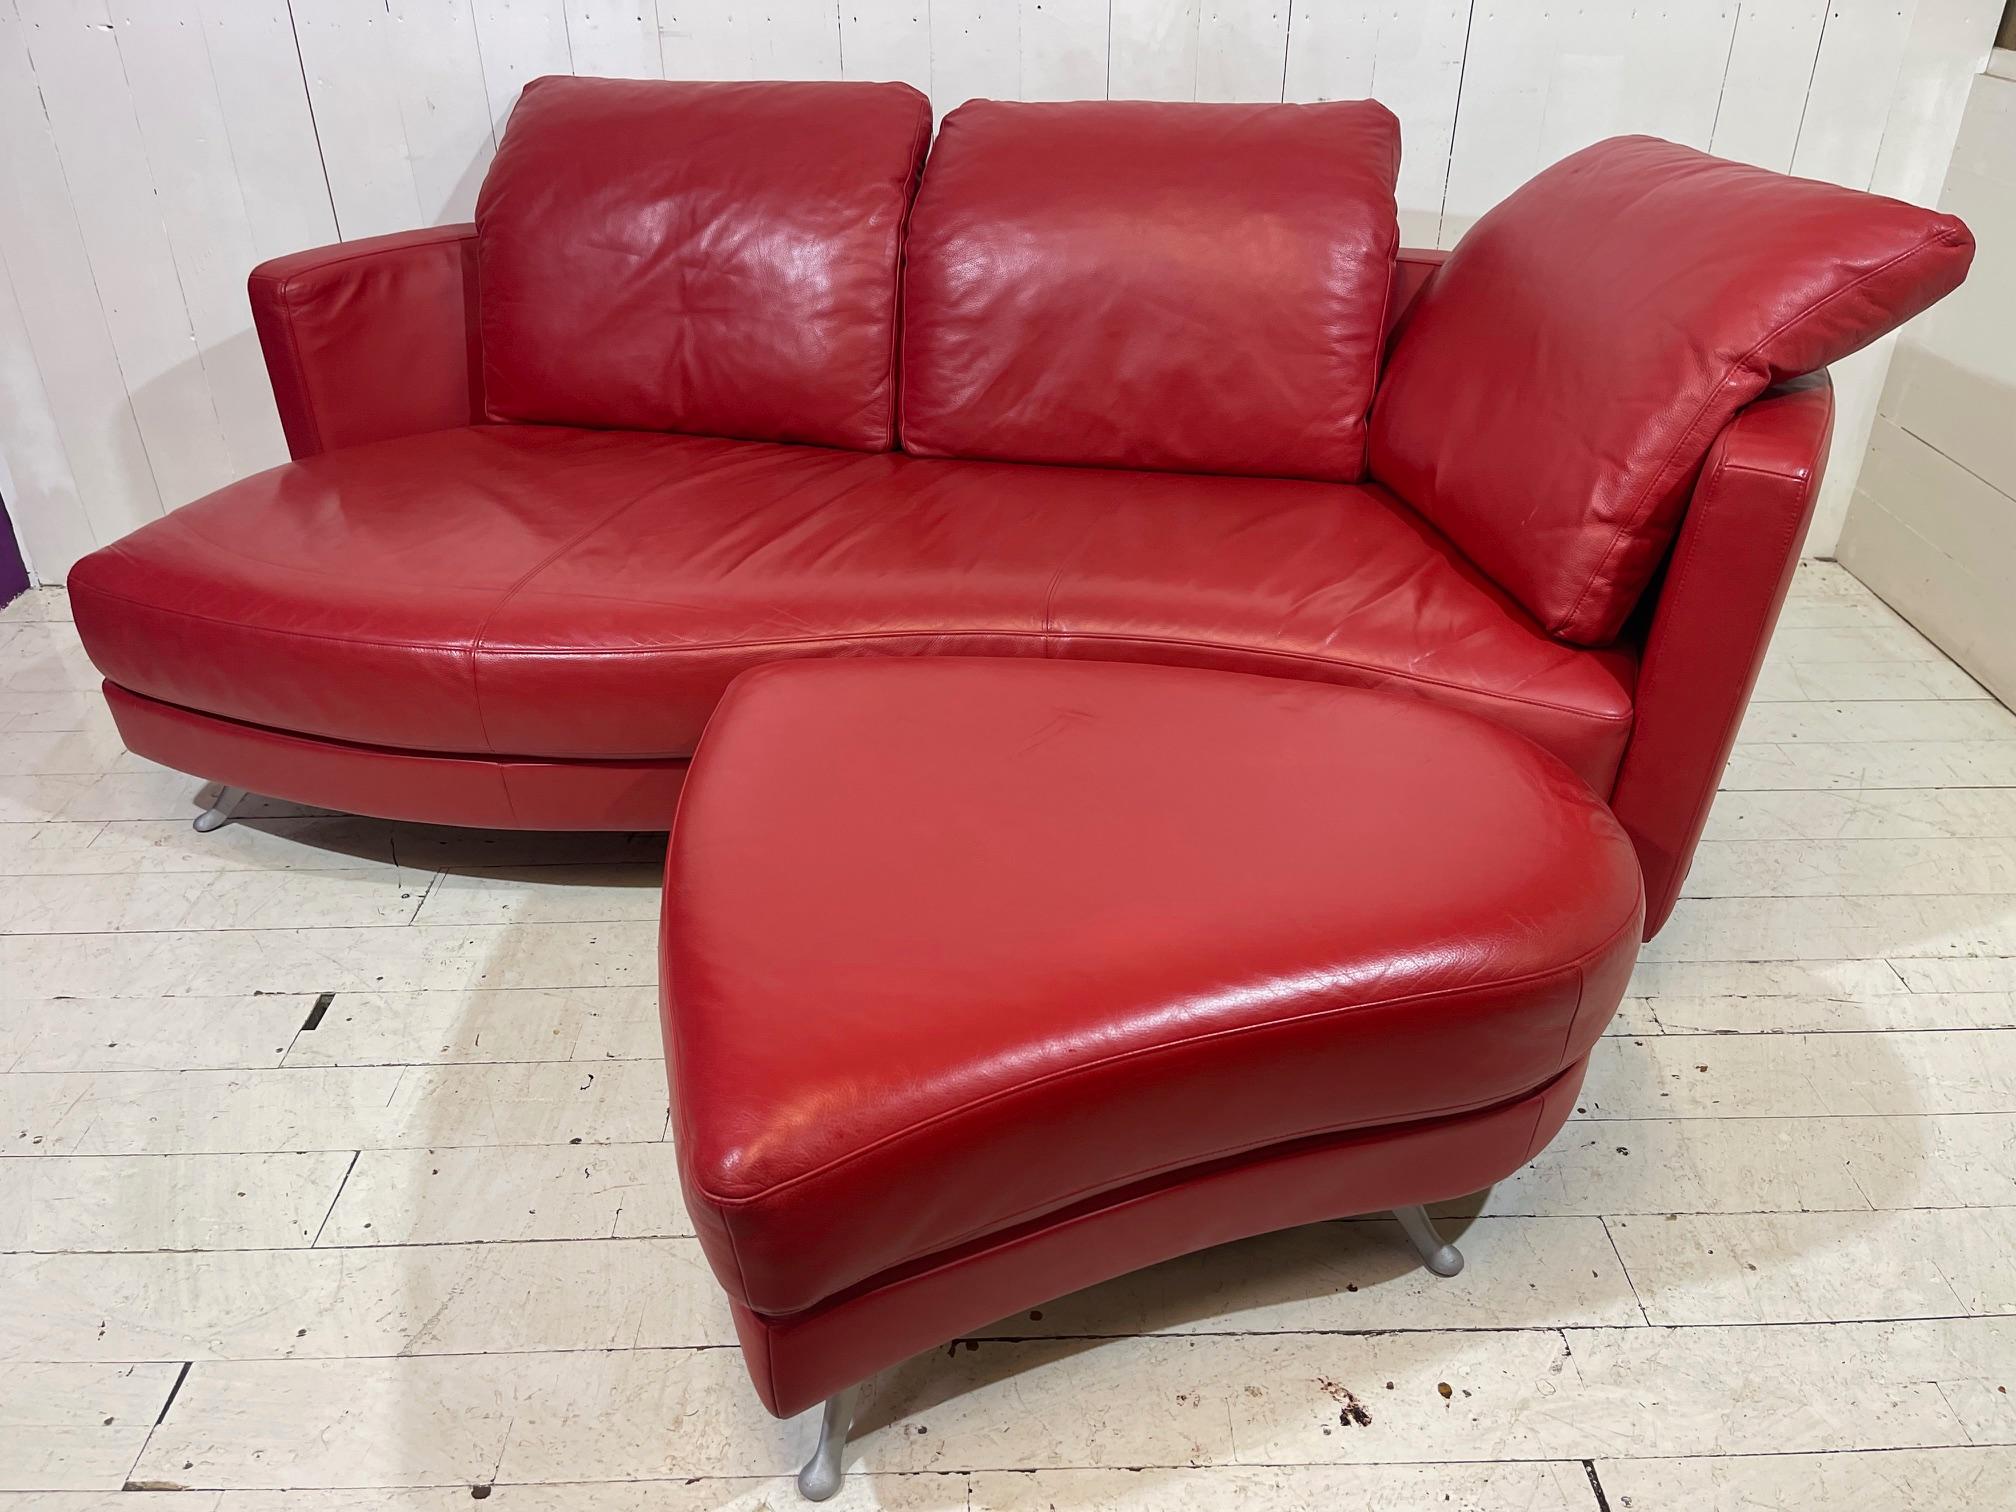 German Contemporary Limited Edition Red Leather Sofa and Footstool Set by Rolf Benz For Sale